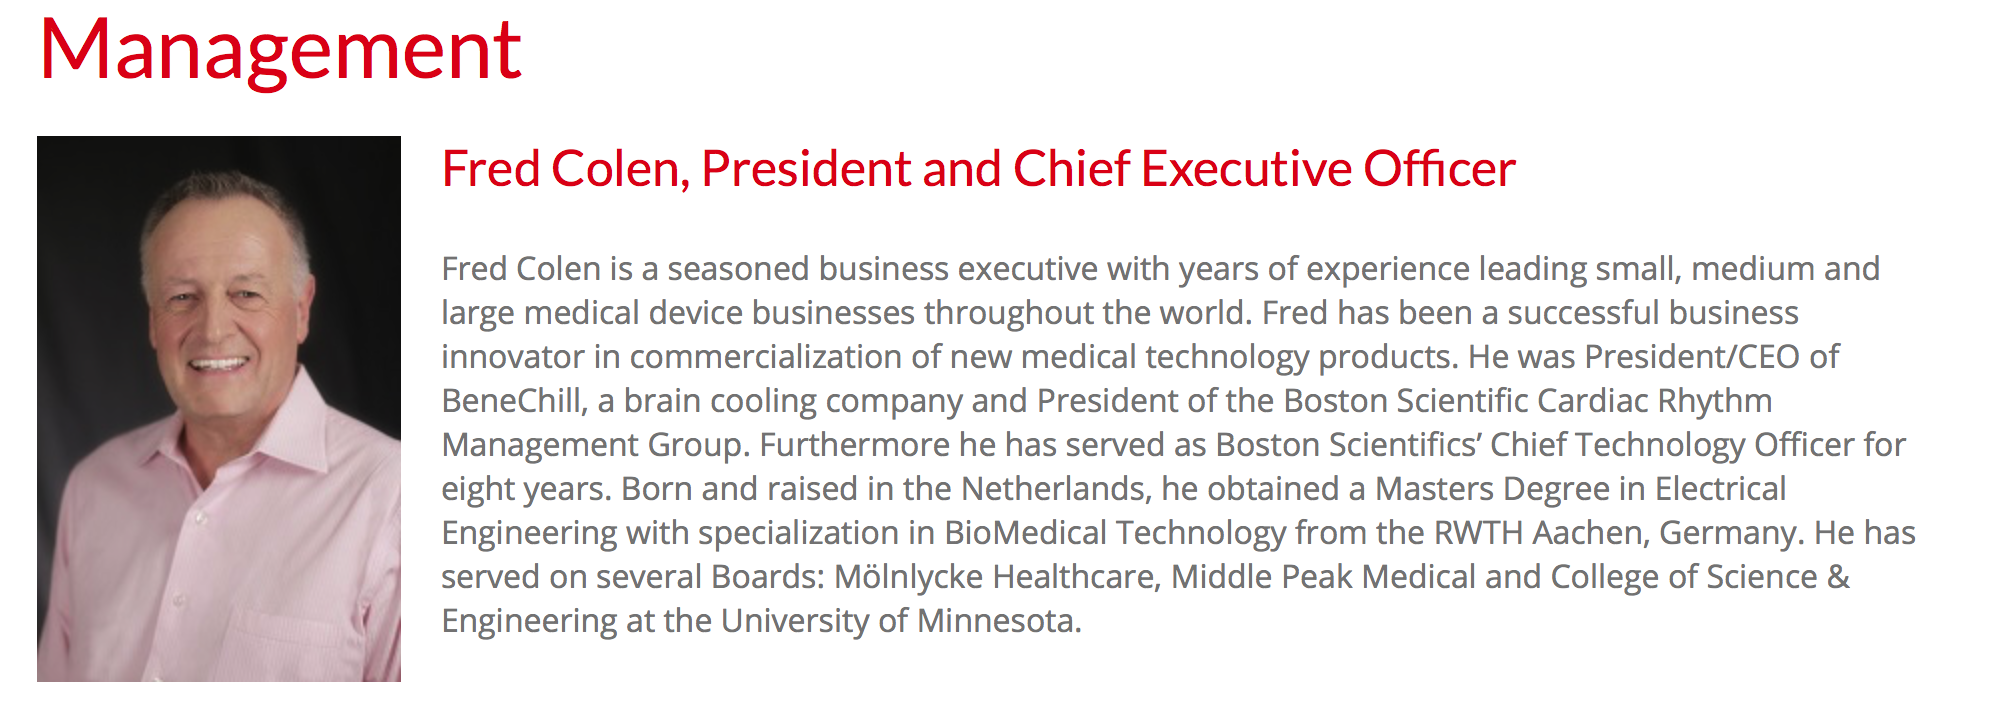 Fred Colen - President and CEO